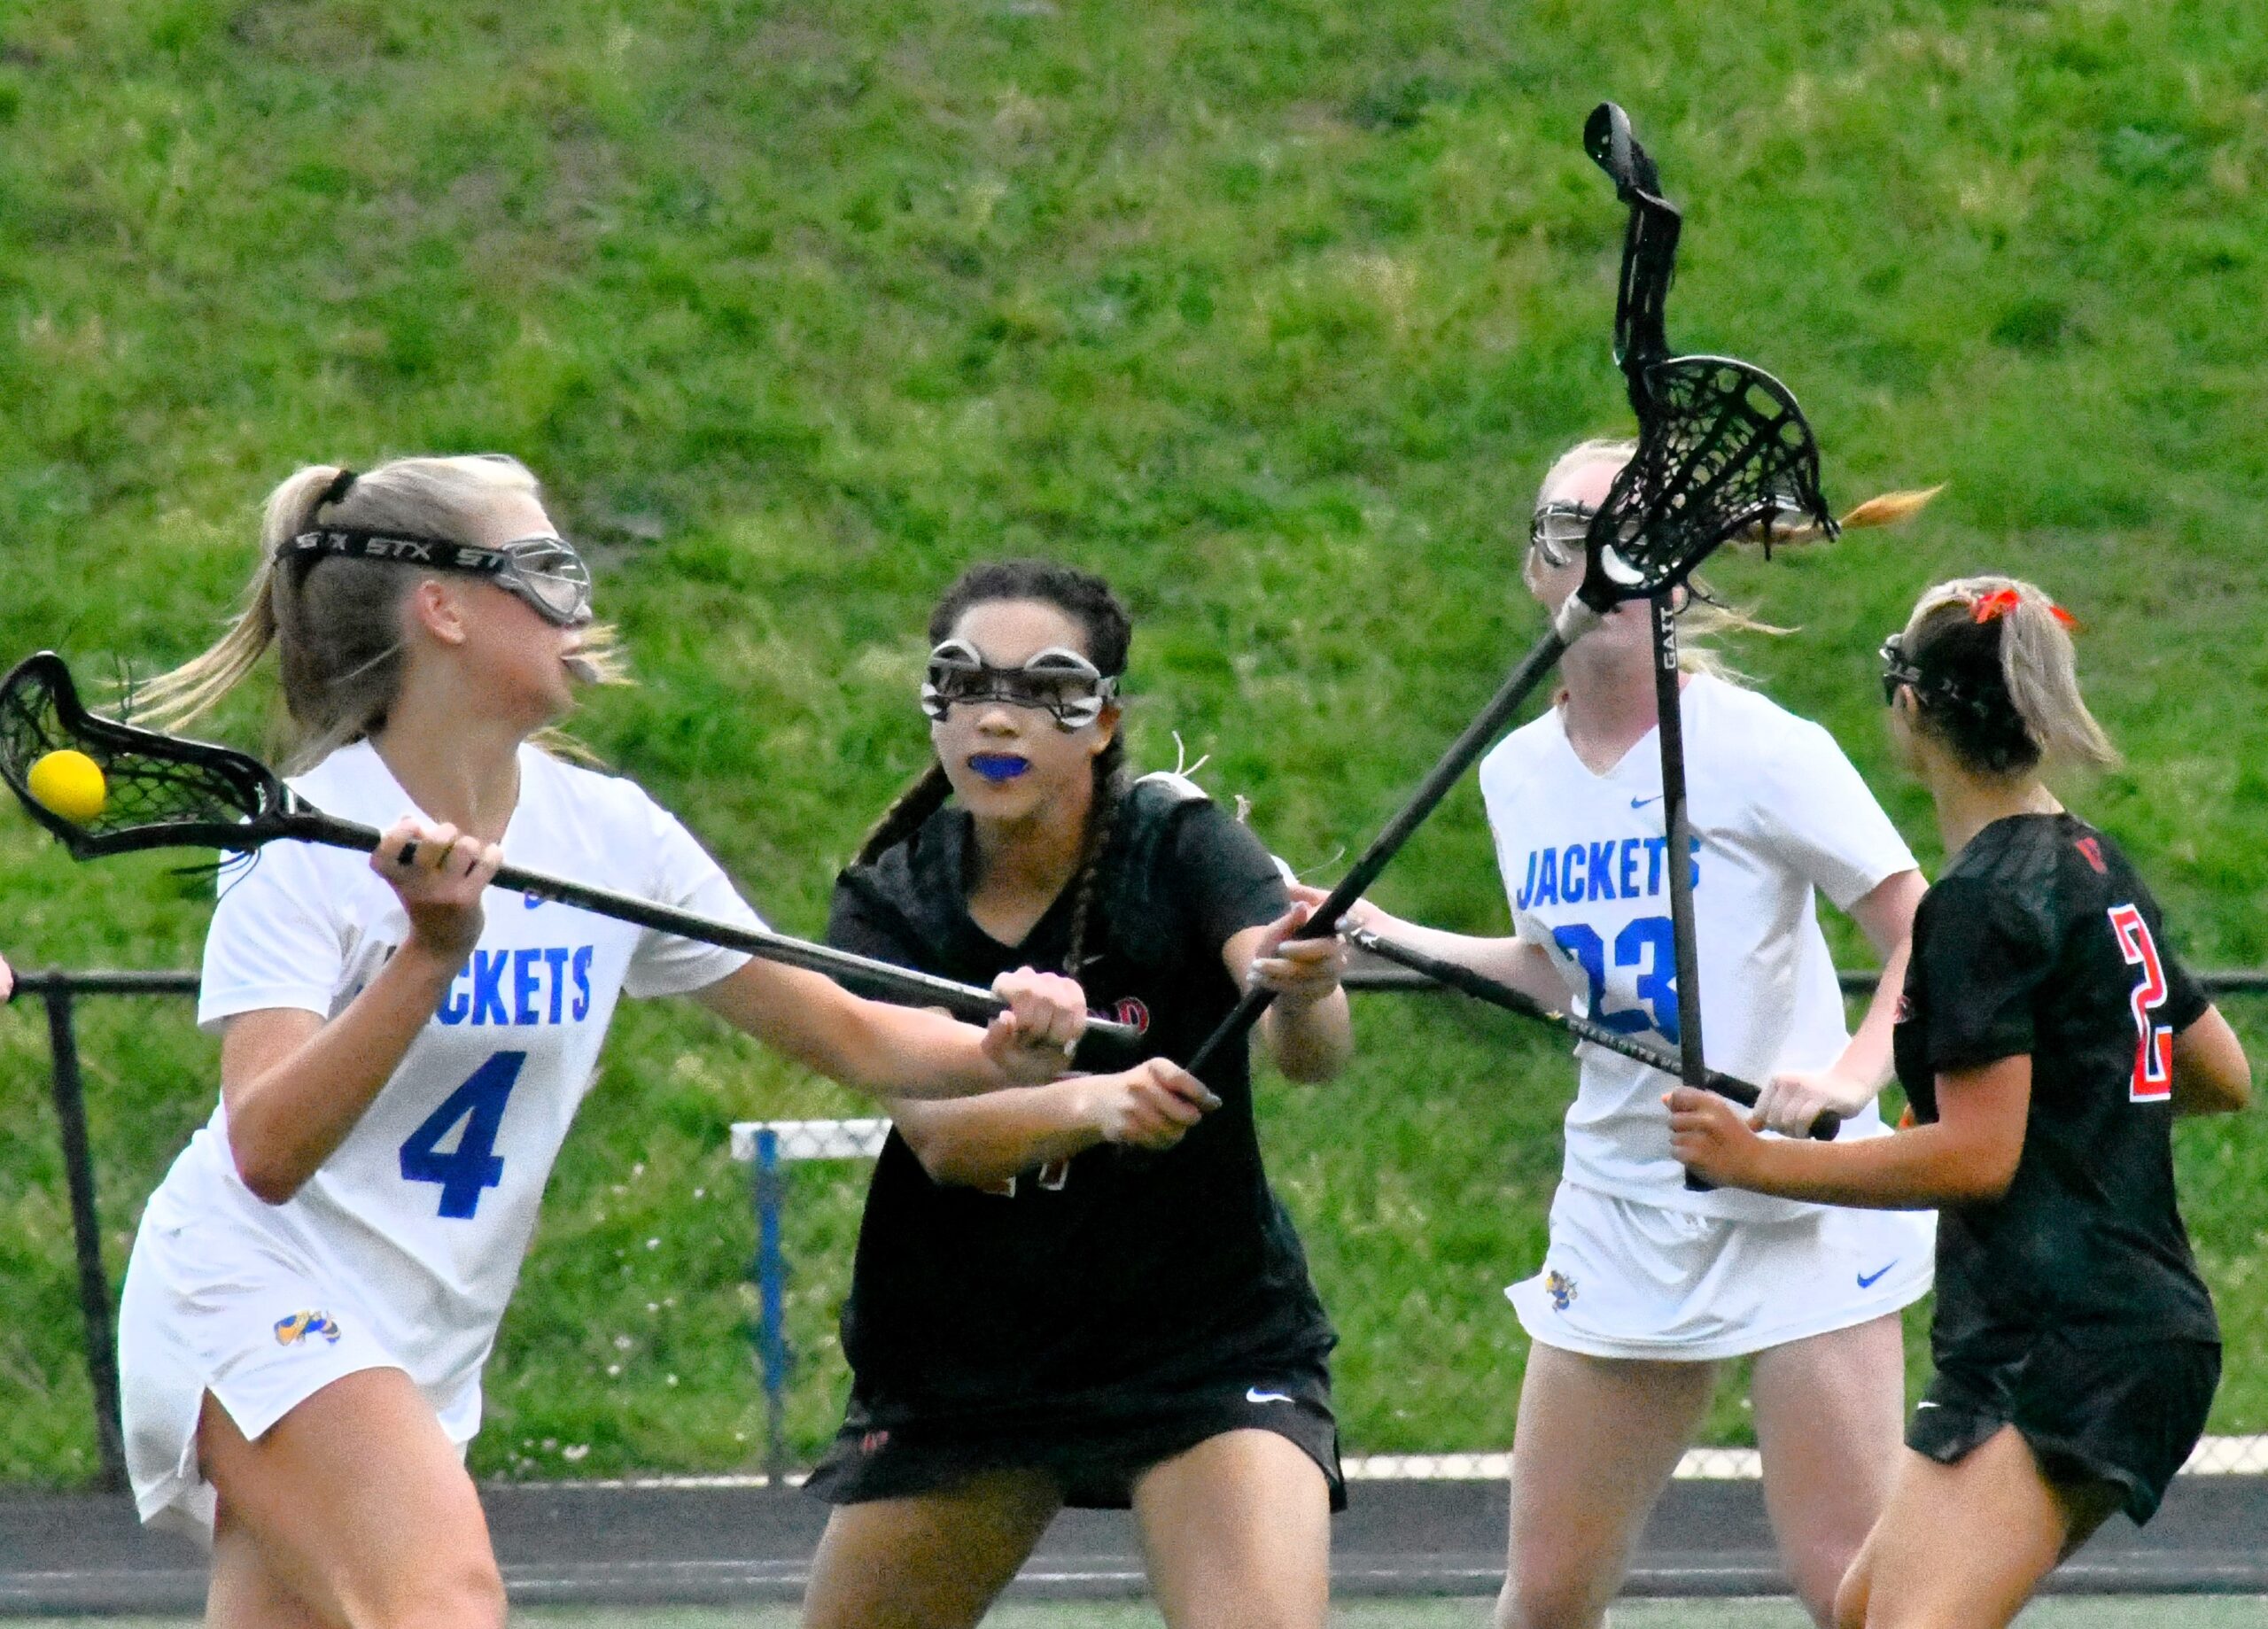 Third time, no charm as Fort Mill beats Falcons to open lacrosse playoffs (April 16 Roundup)